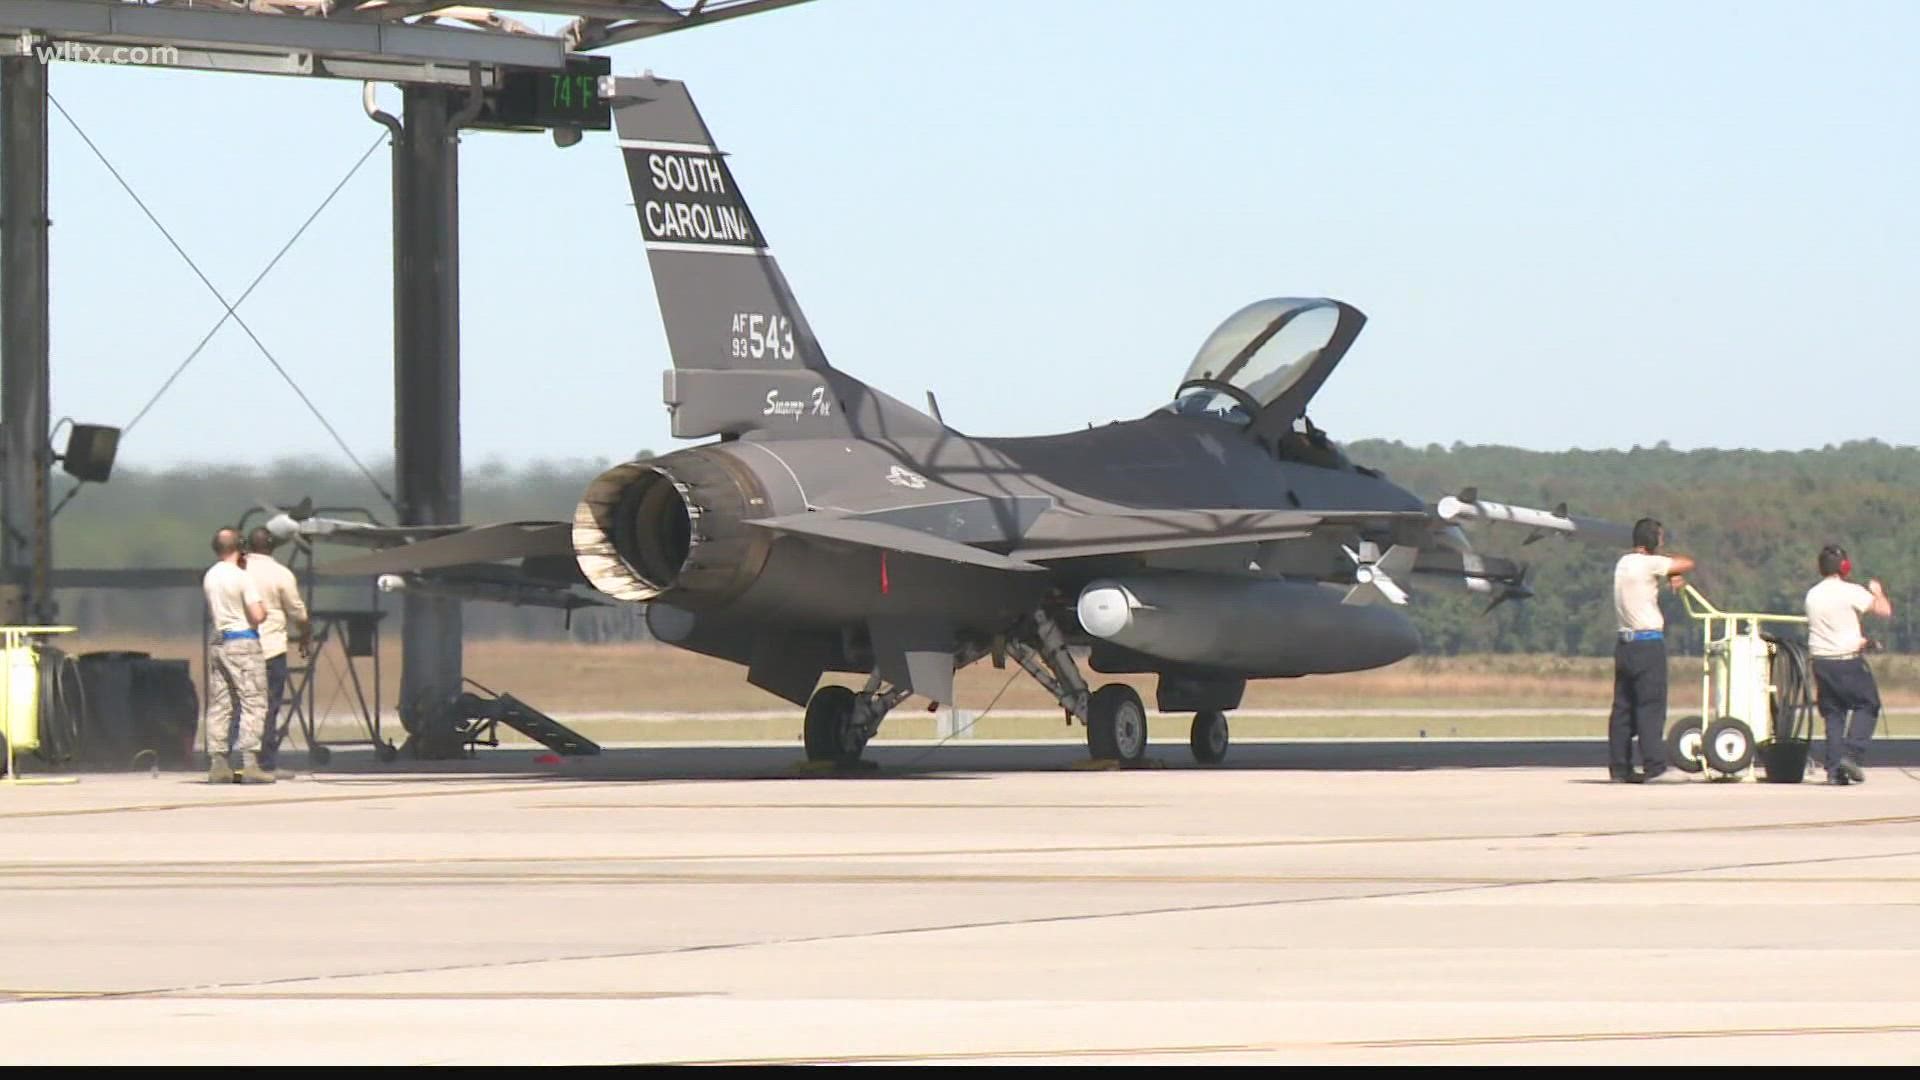 Federal lawmakers passed a spending package this week that includes $273 million in funding for military projects throughout the state.